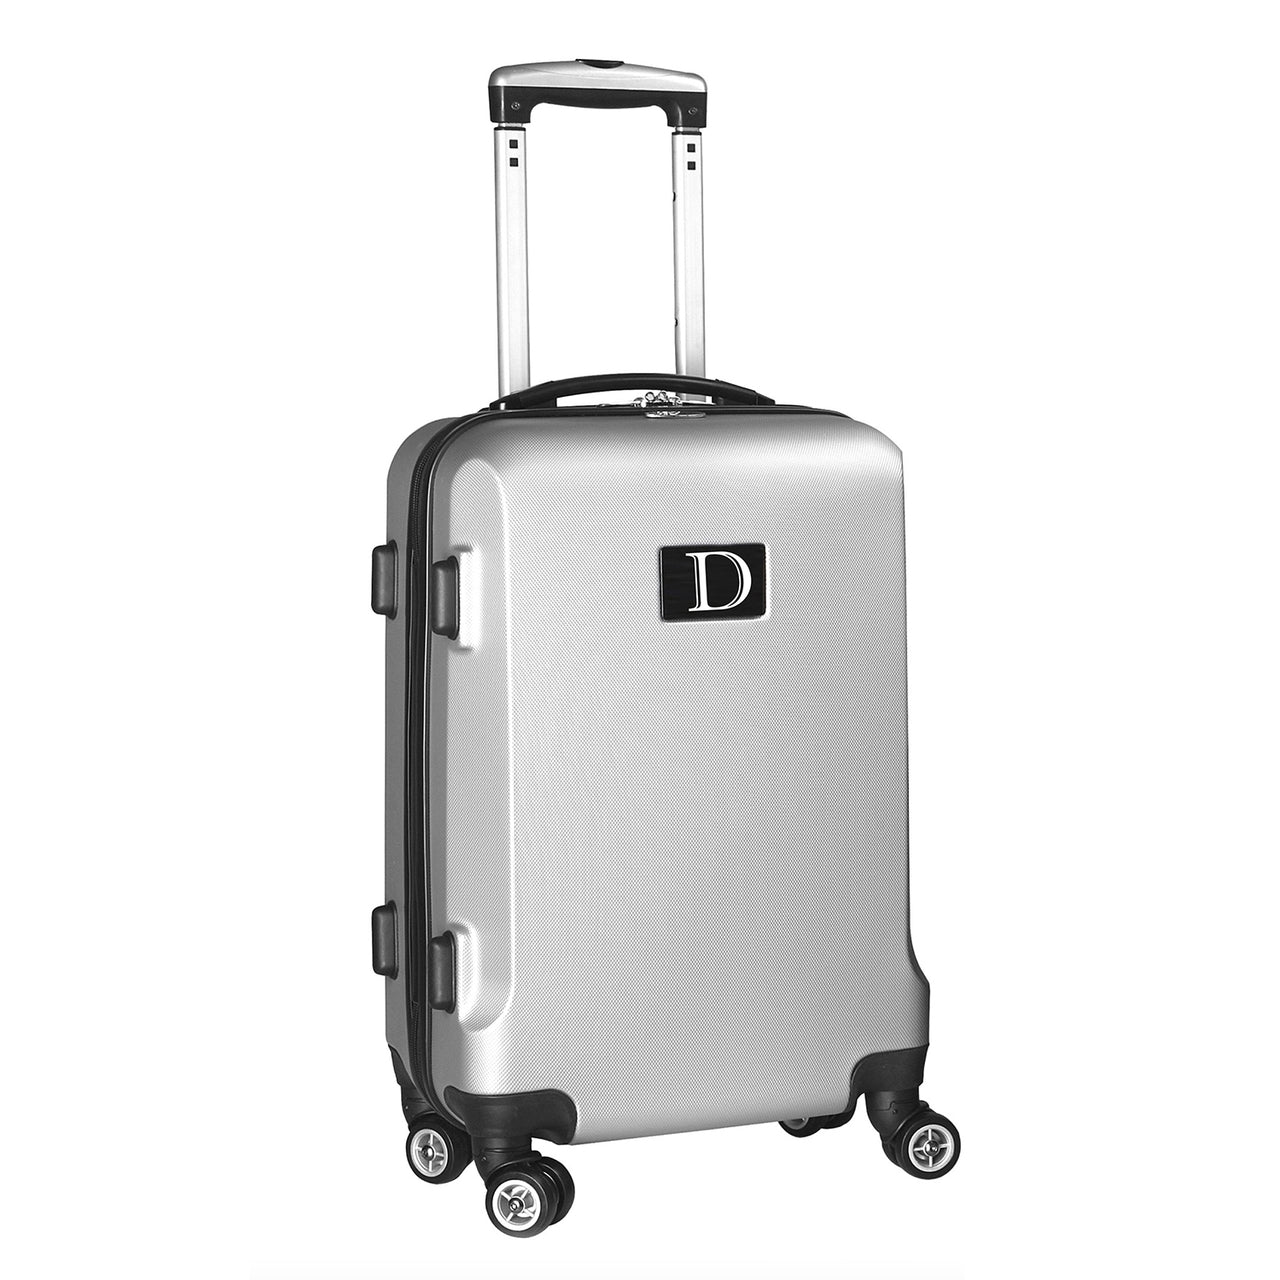 Personalized Initial Name letter "D" 20 inches Carry on Hardcase Spinner Luggage by Mojo in SILVER